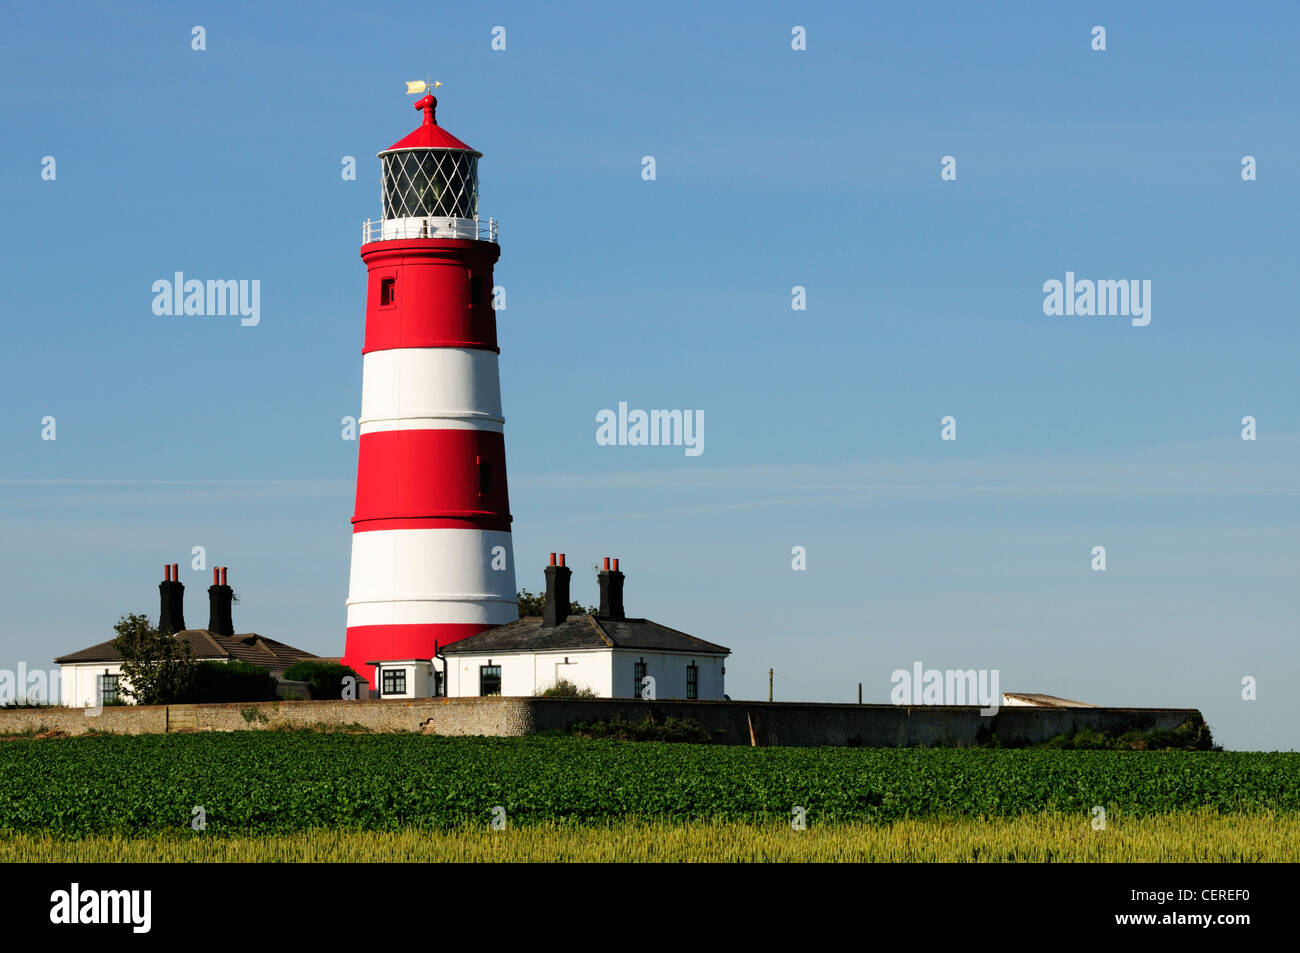 Happisburgh Lighthouse built in 1790, the oldest working light in East Anglia. Stock Photo